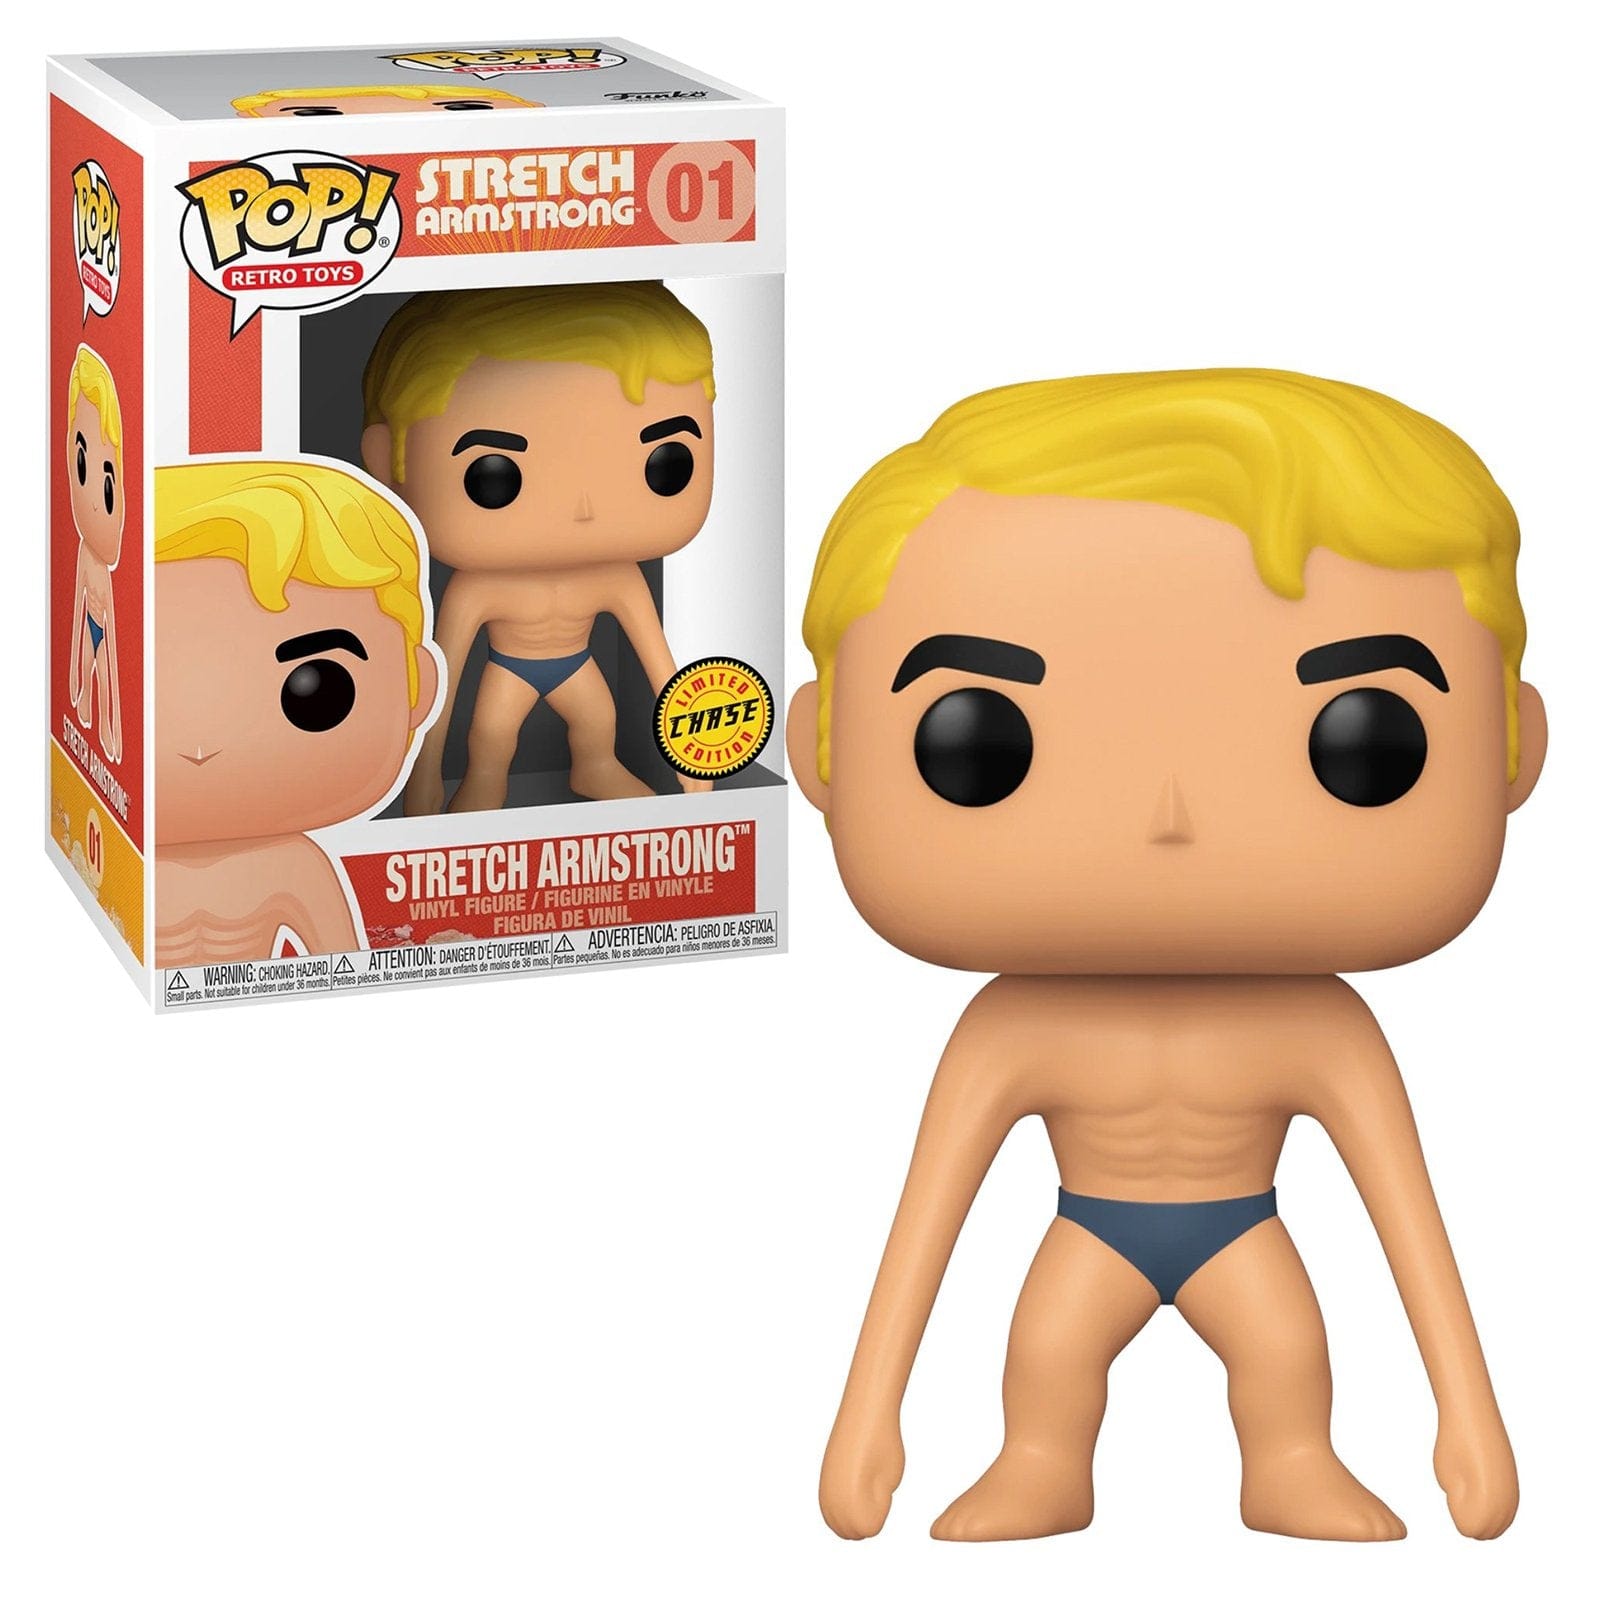 Funko Pop! Retro Toys - Stretch Armstrong (Chase) #01